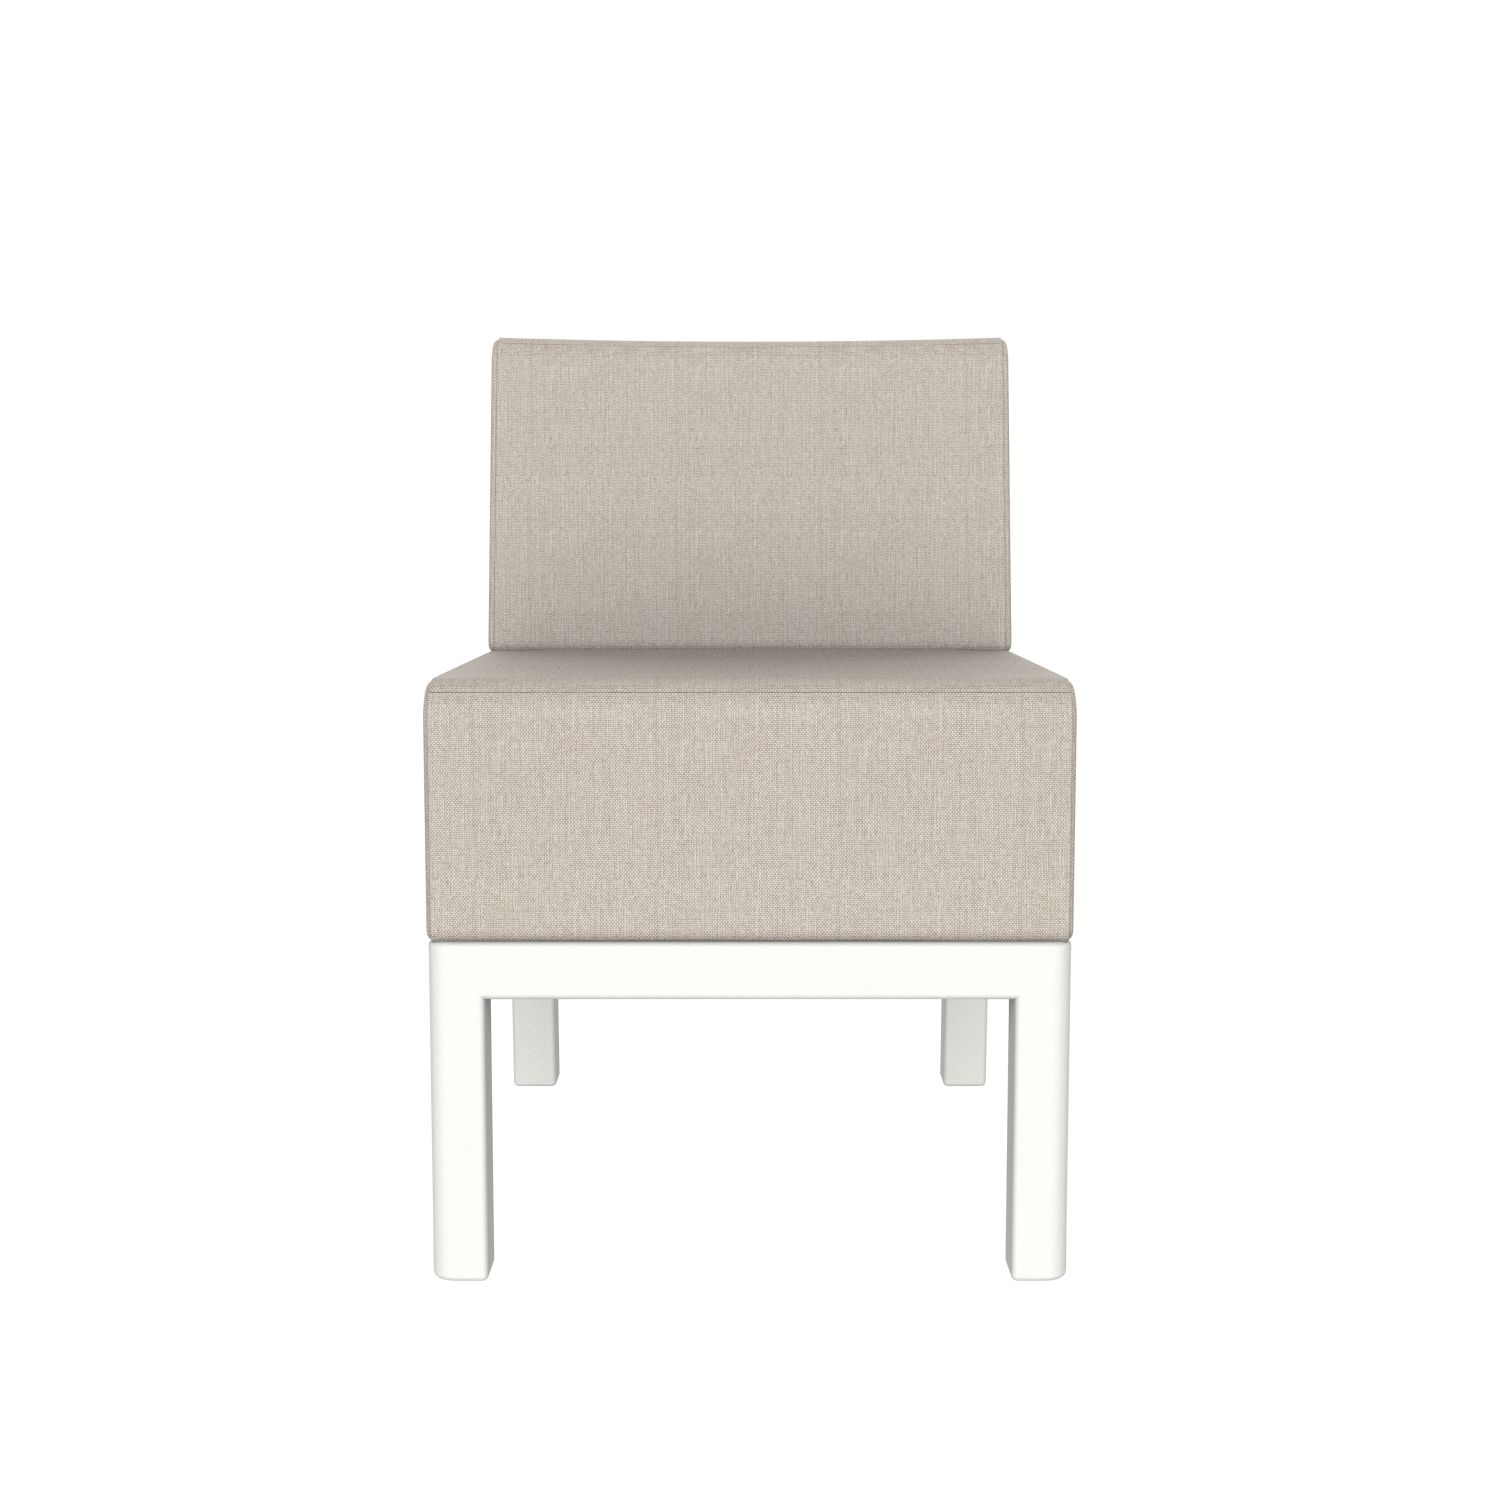 lensvelt piet boon chair 01 without armrests board natural 01 price level 1 signal white 9003 hard leg ends